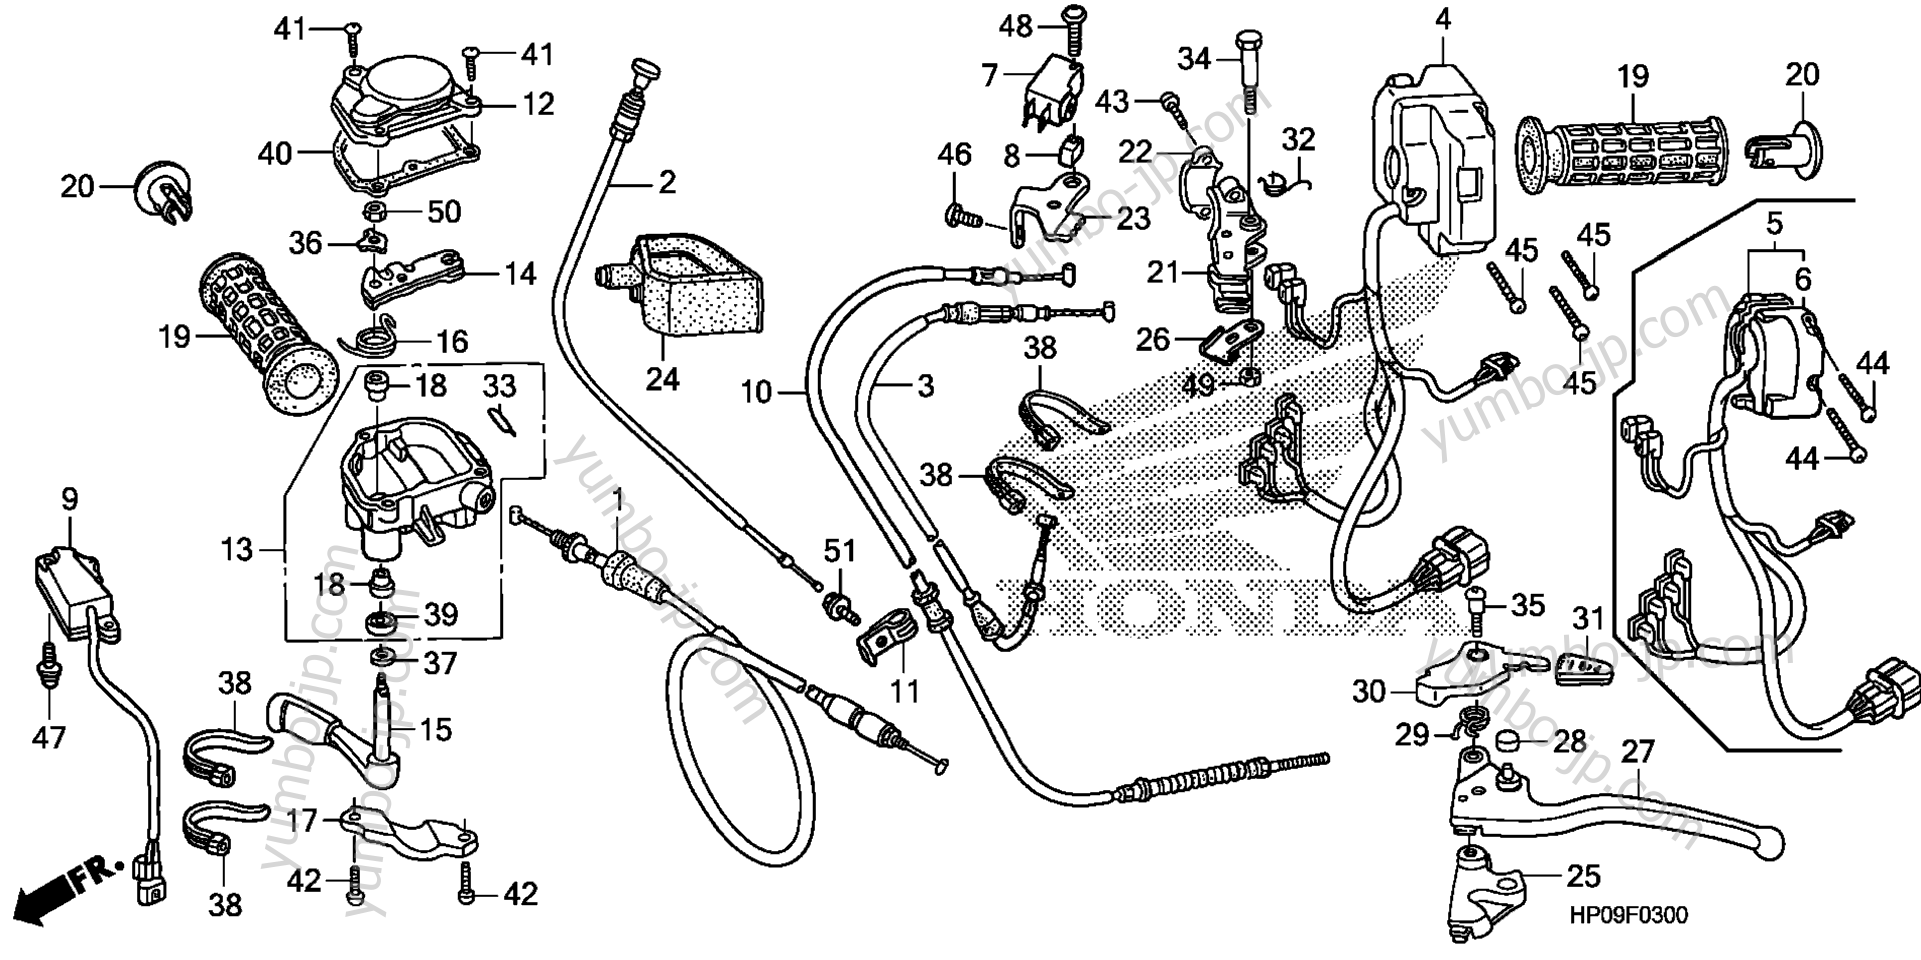 HANDLE LEVER / SWITCH / CABLE for ATVs HONDA TRX500FPM A 2009 year